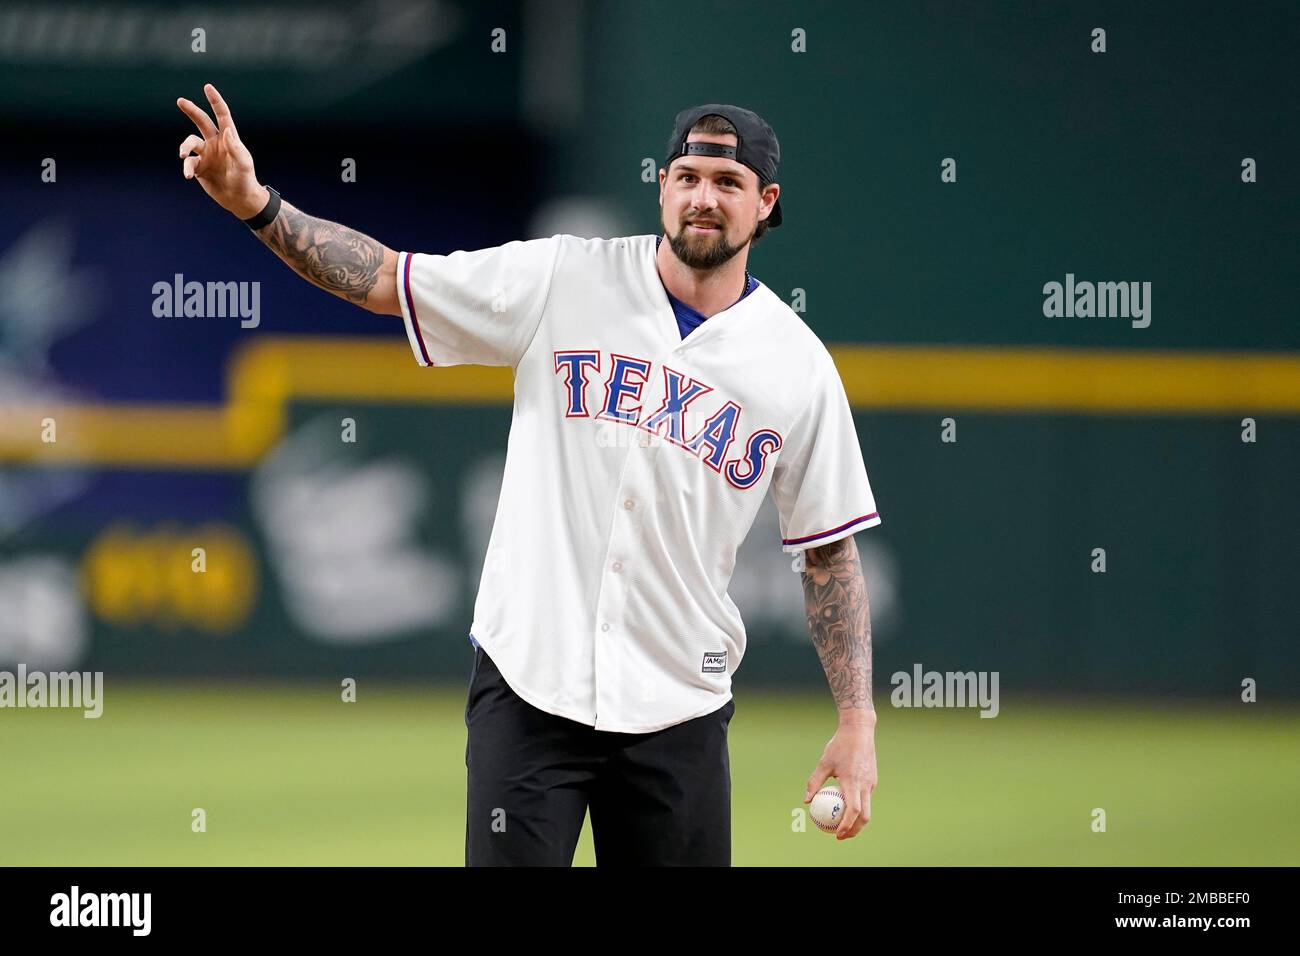 National Hockey League player, Jamie Benn of the Dallas Stars, acknowledges  applause from fans before throwing out the ceremonial first pitch before a  baseball game between the Tampa Bay Rays and Texas